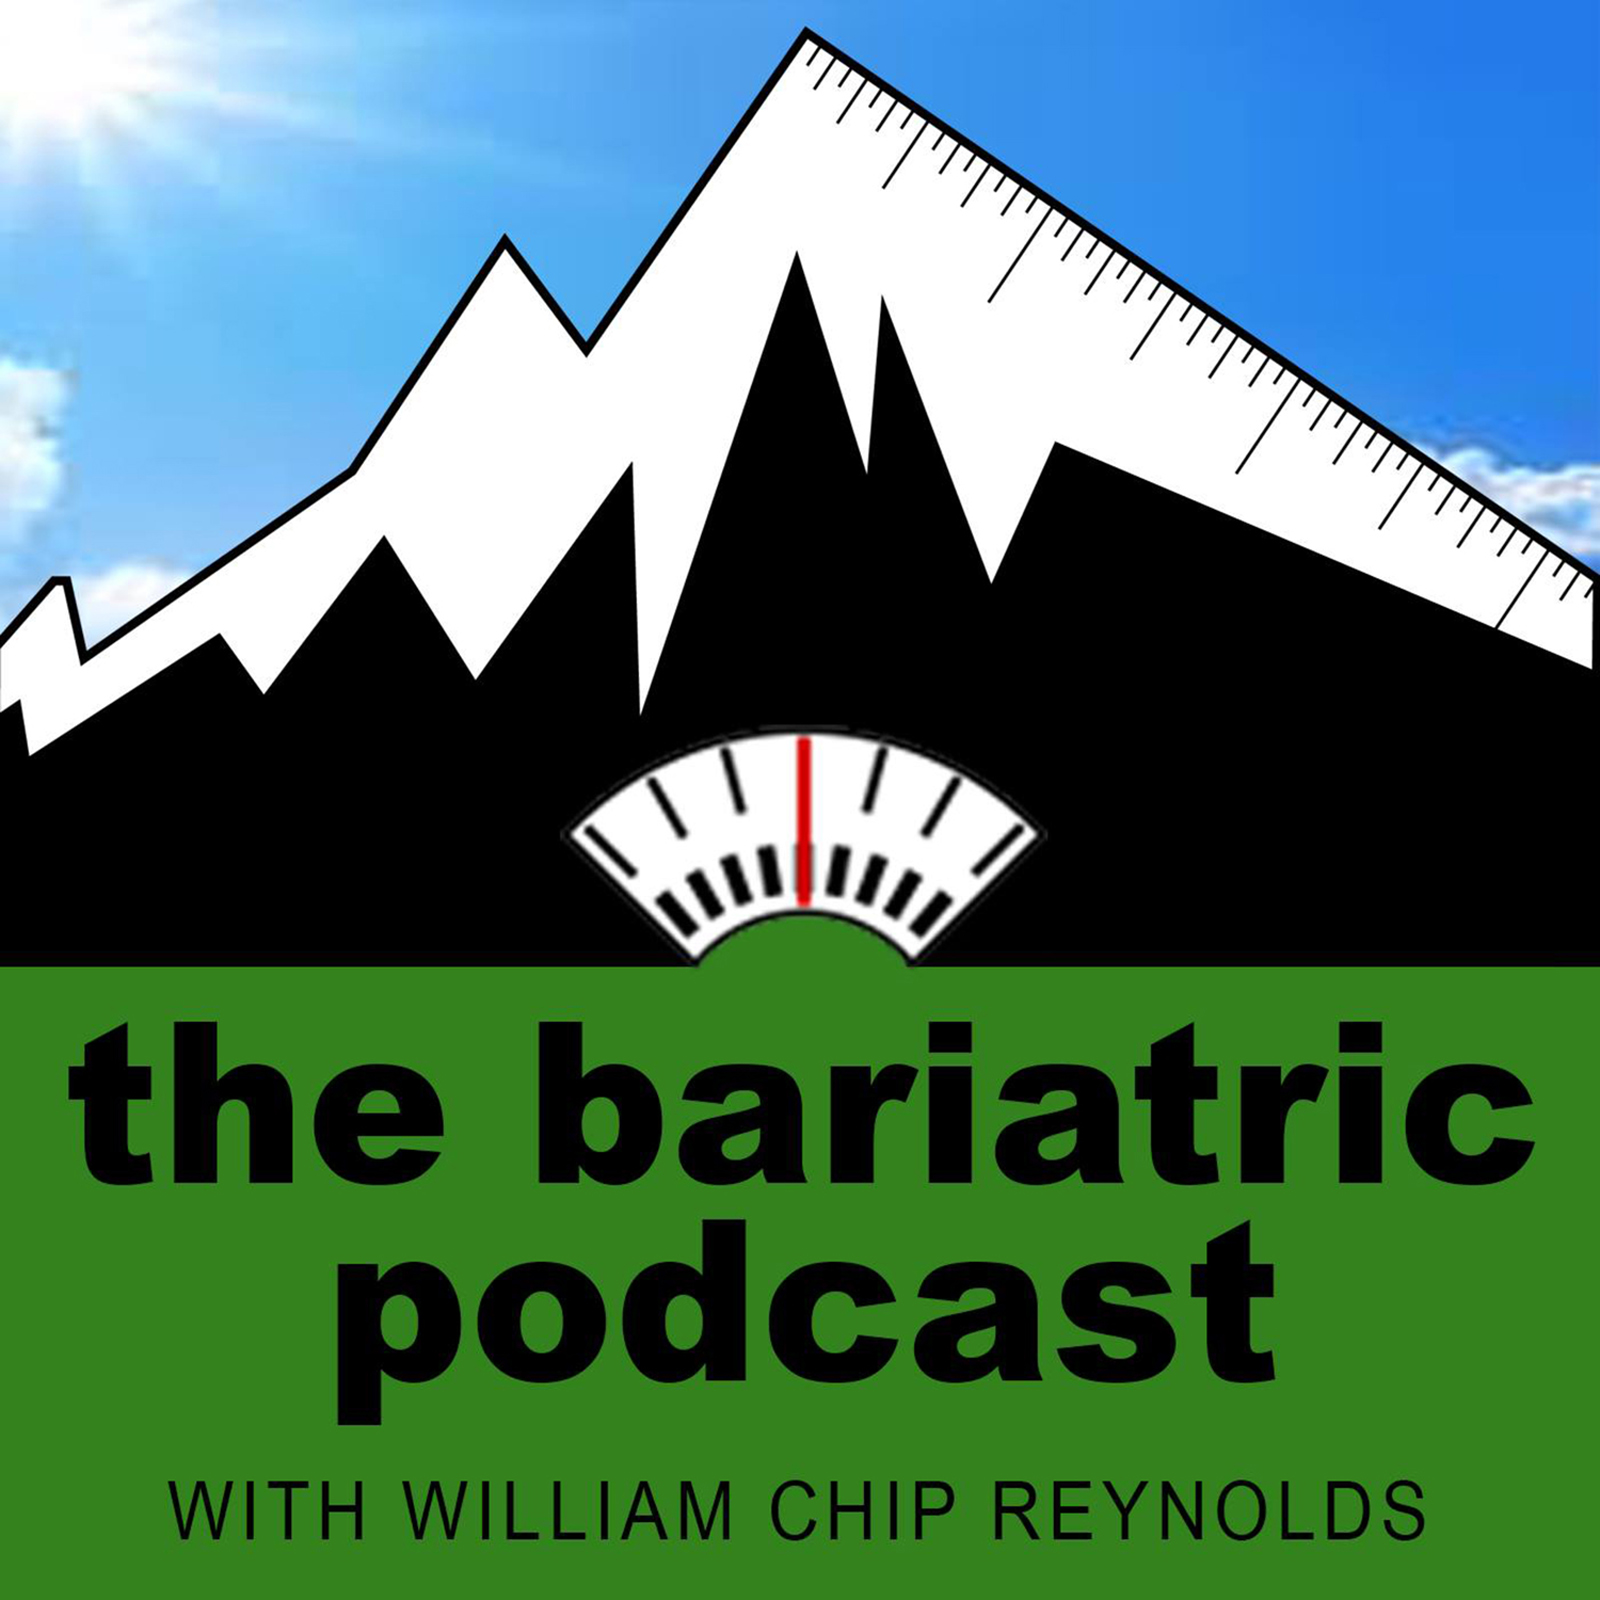 The Bariatric Podcast Episode Fifteen